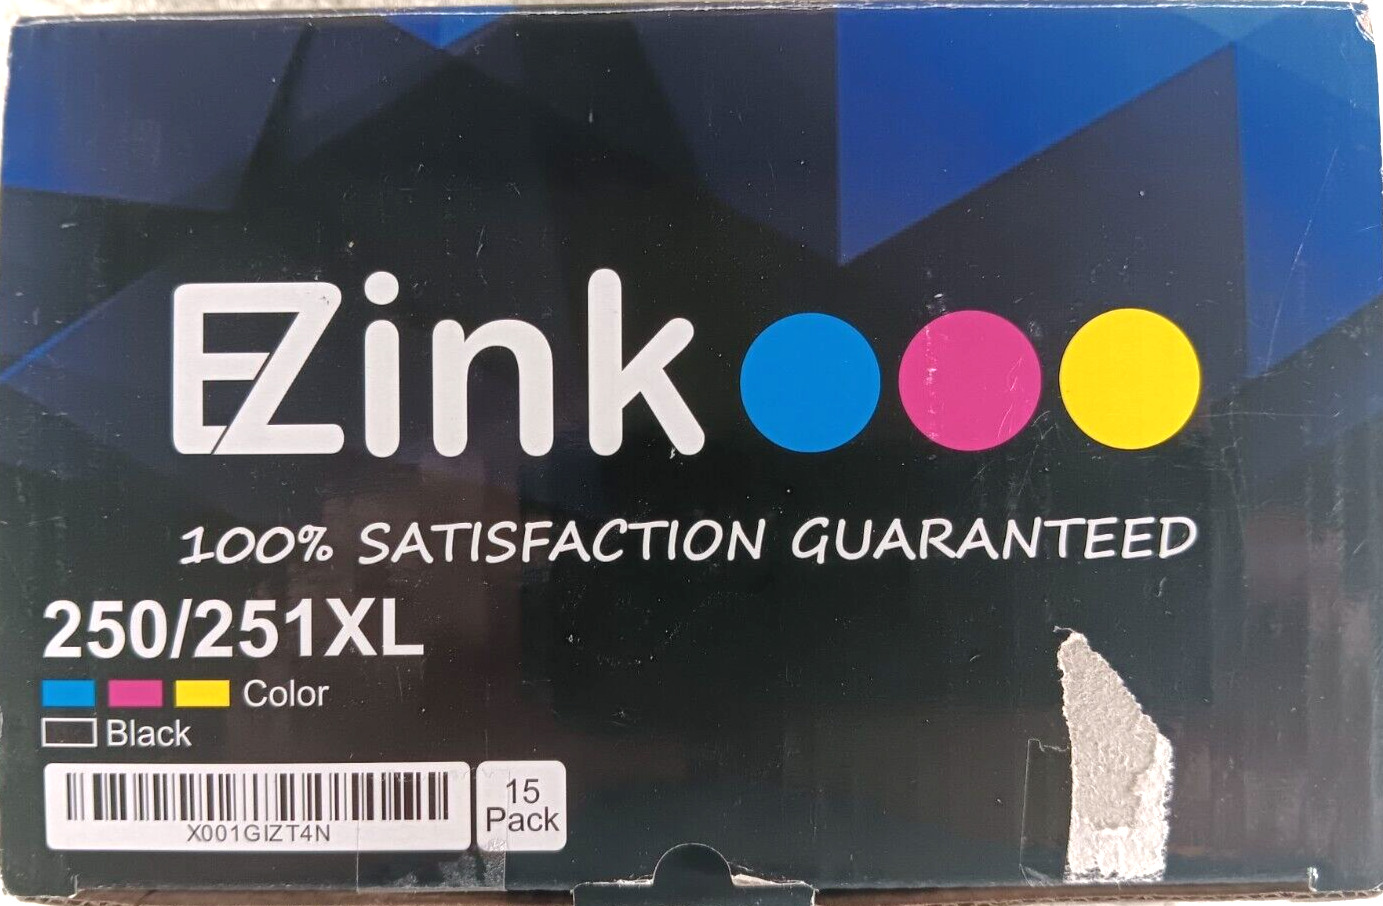 15 Pack 250/251XL Brother Ink Cartridges EZ Ink Multicolor and Black NEW